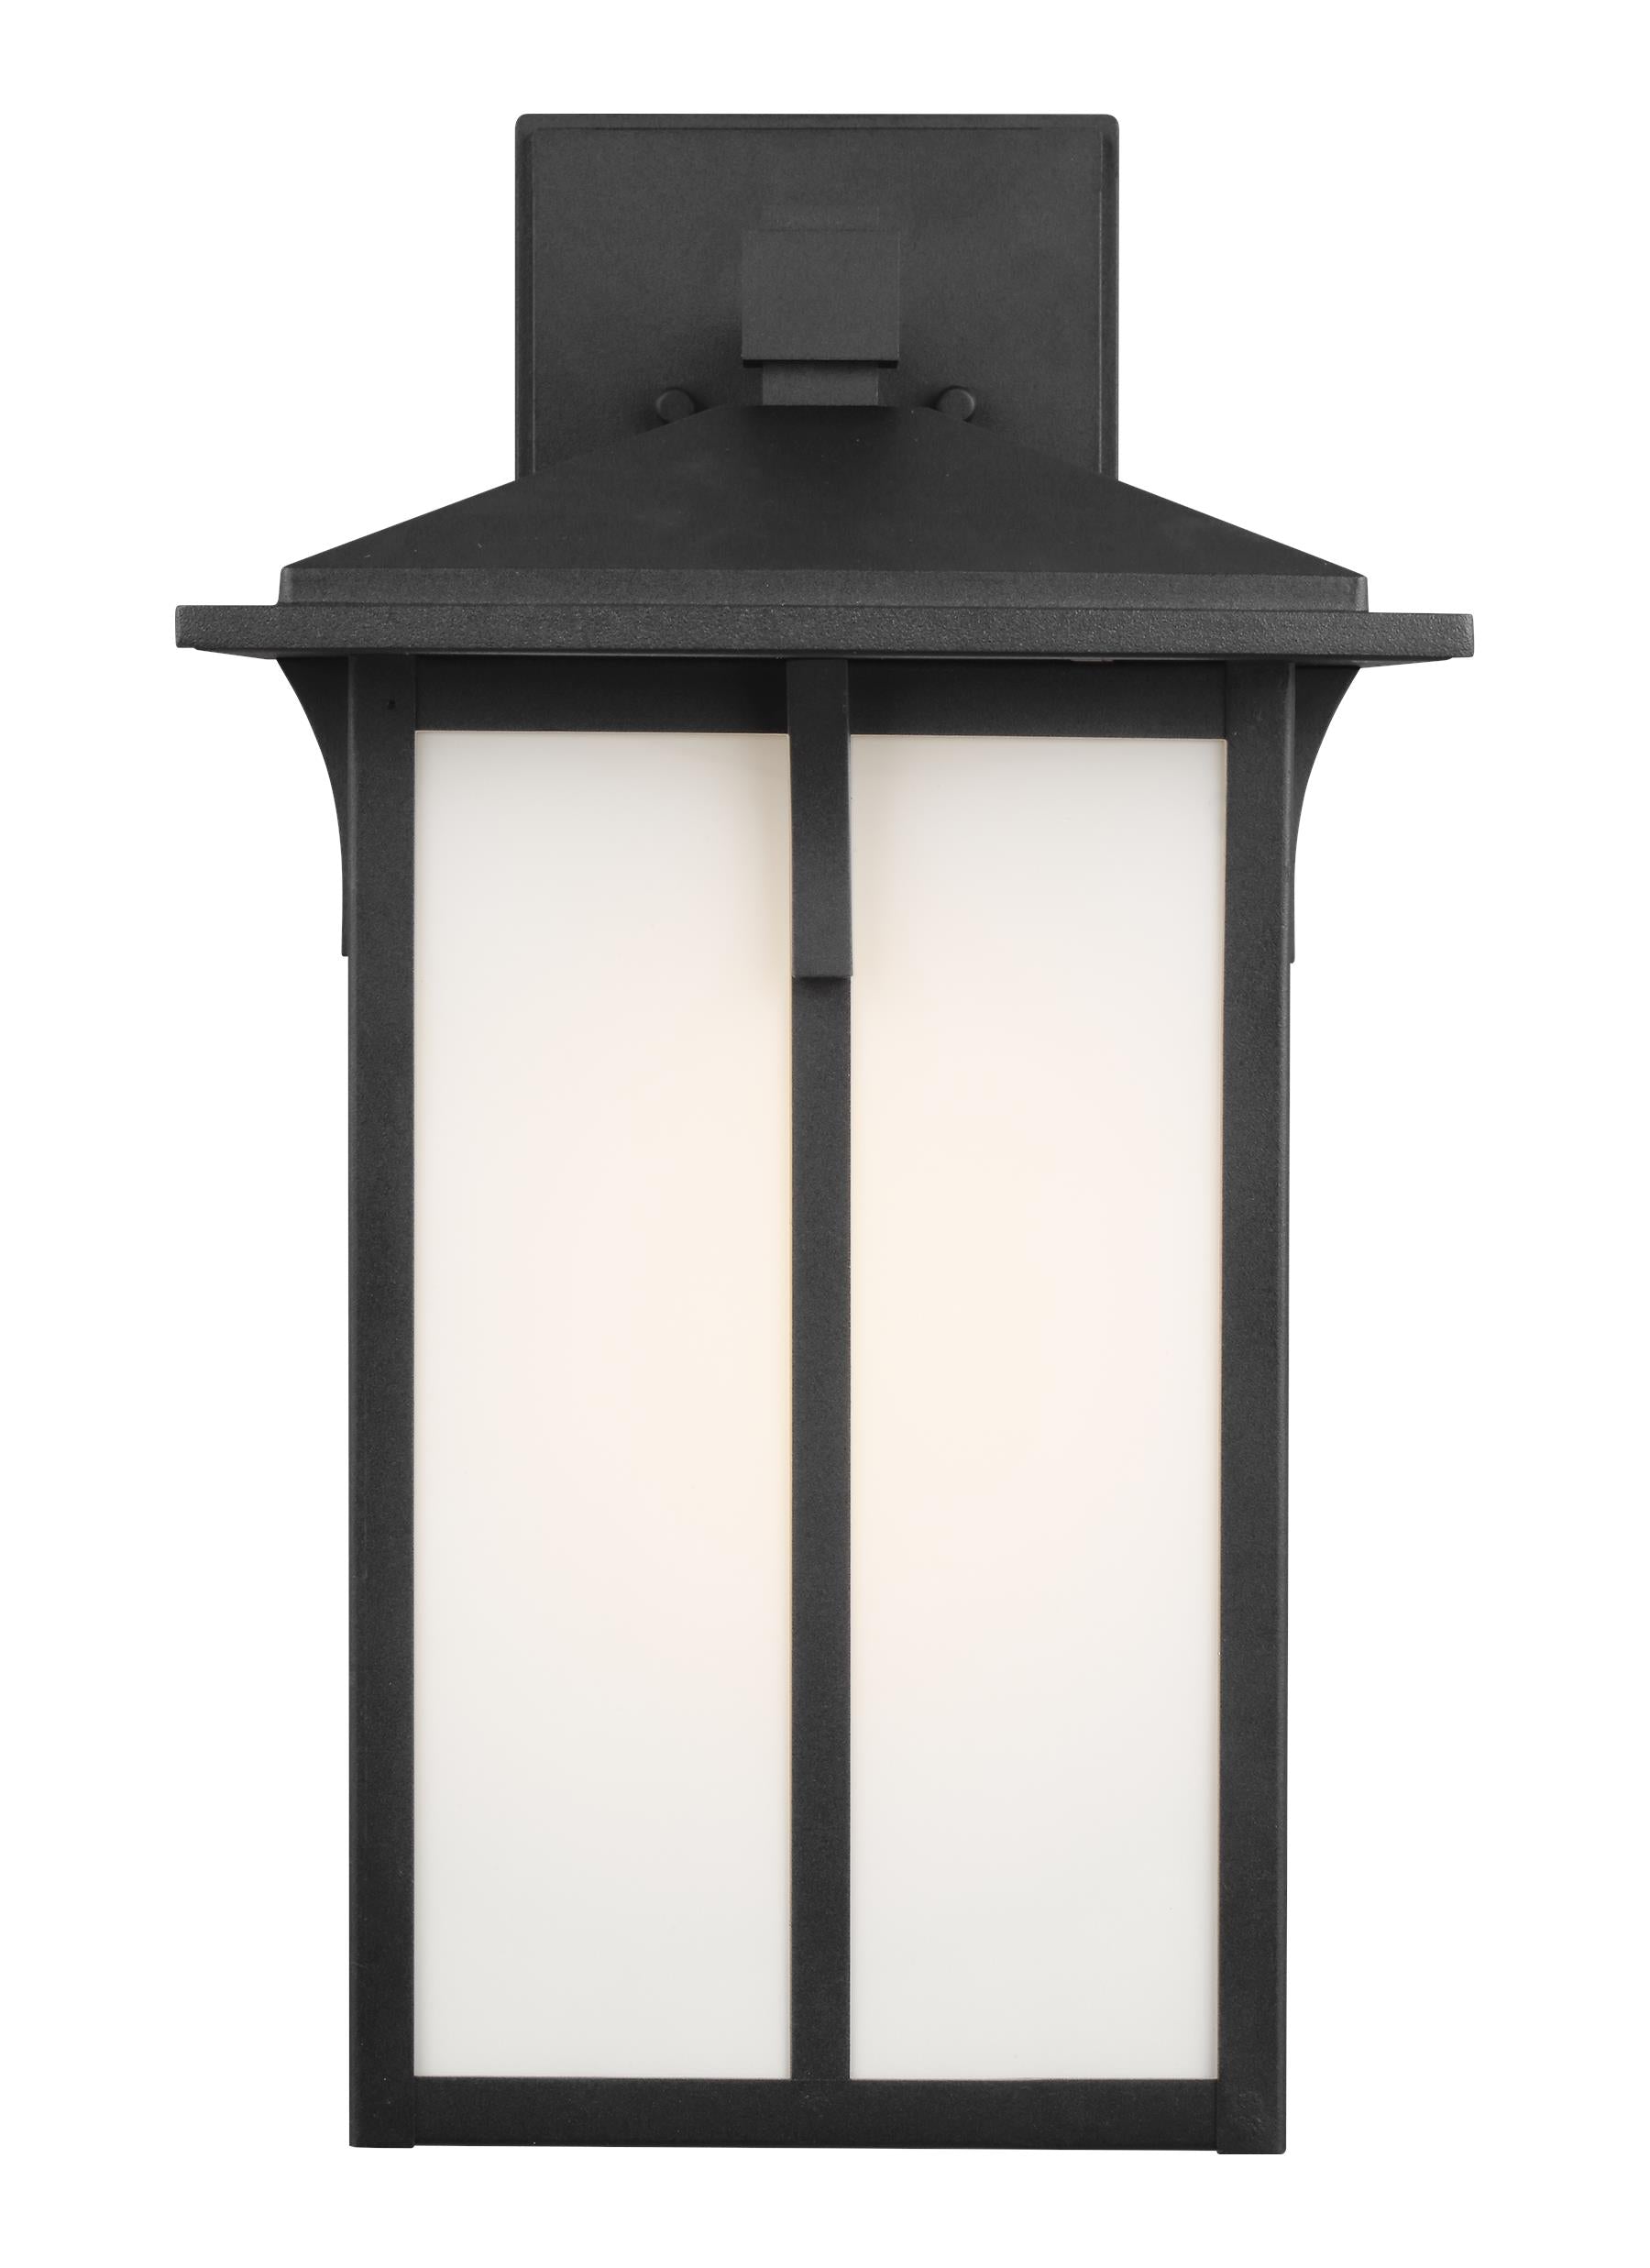 Tomek modern 1-light outdoor exterior large wall lantern sconce in black finish with etched white glass panels